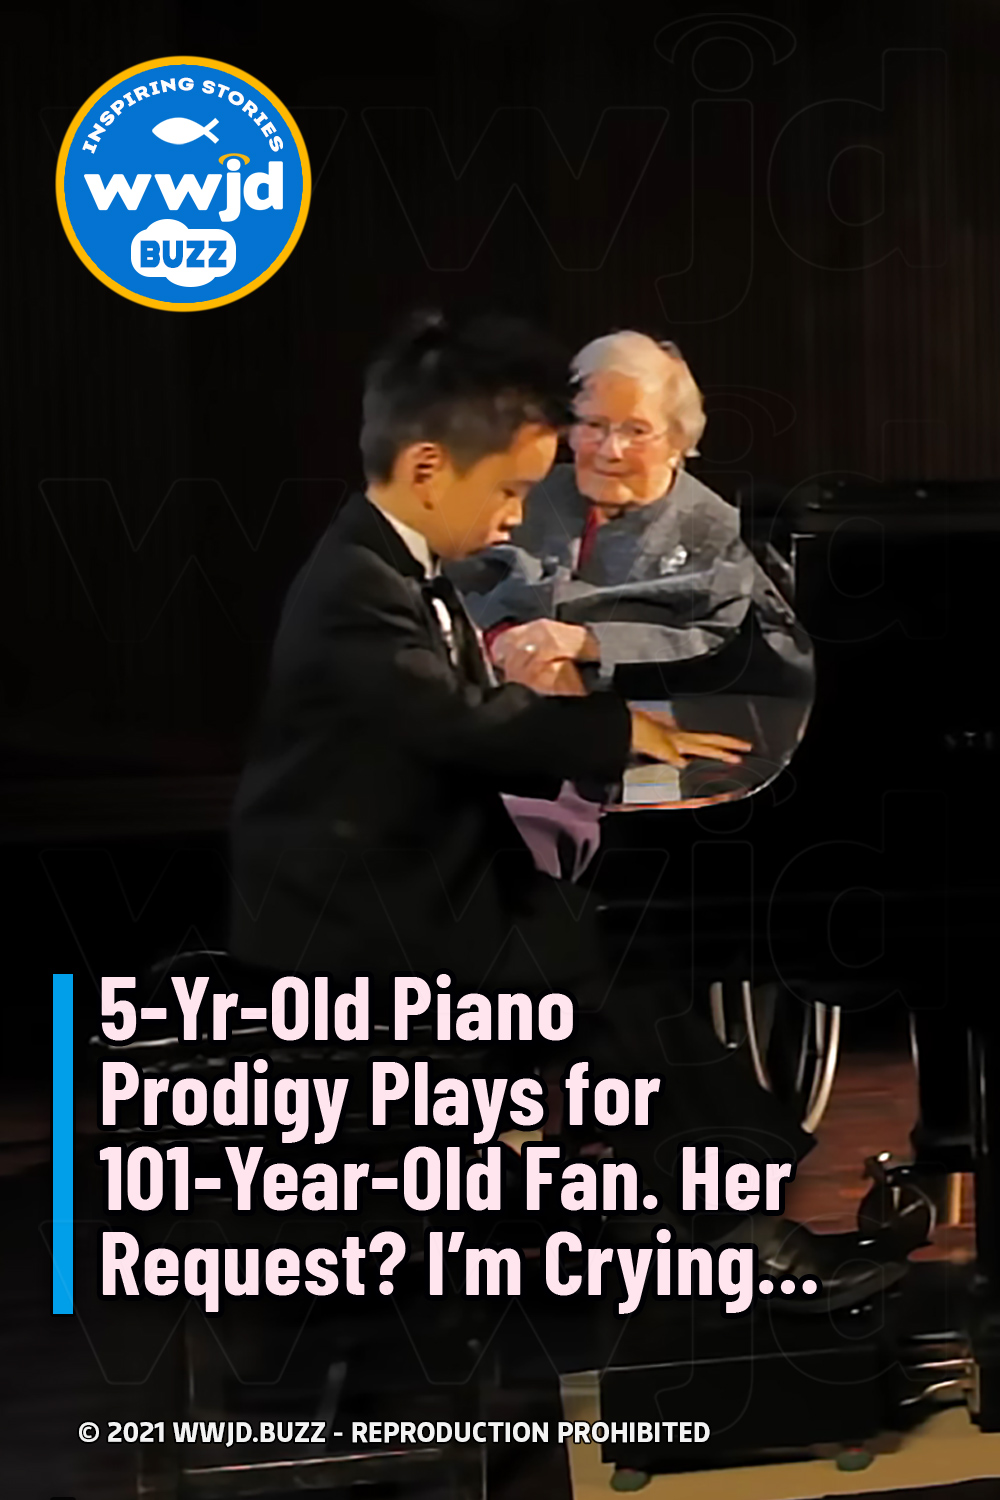 5-Yr-Old Piano Prodigy Plays for 101-Year-Old Fan. Her Request? I\'m Crying...